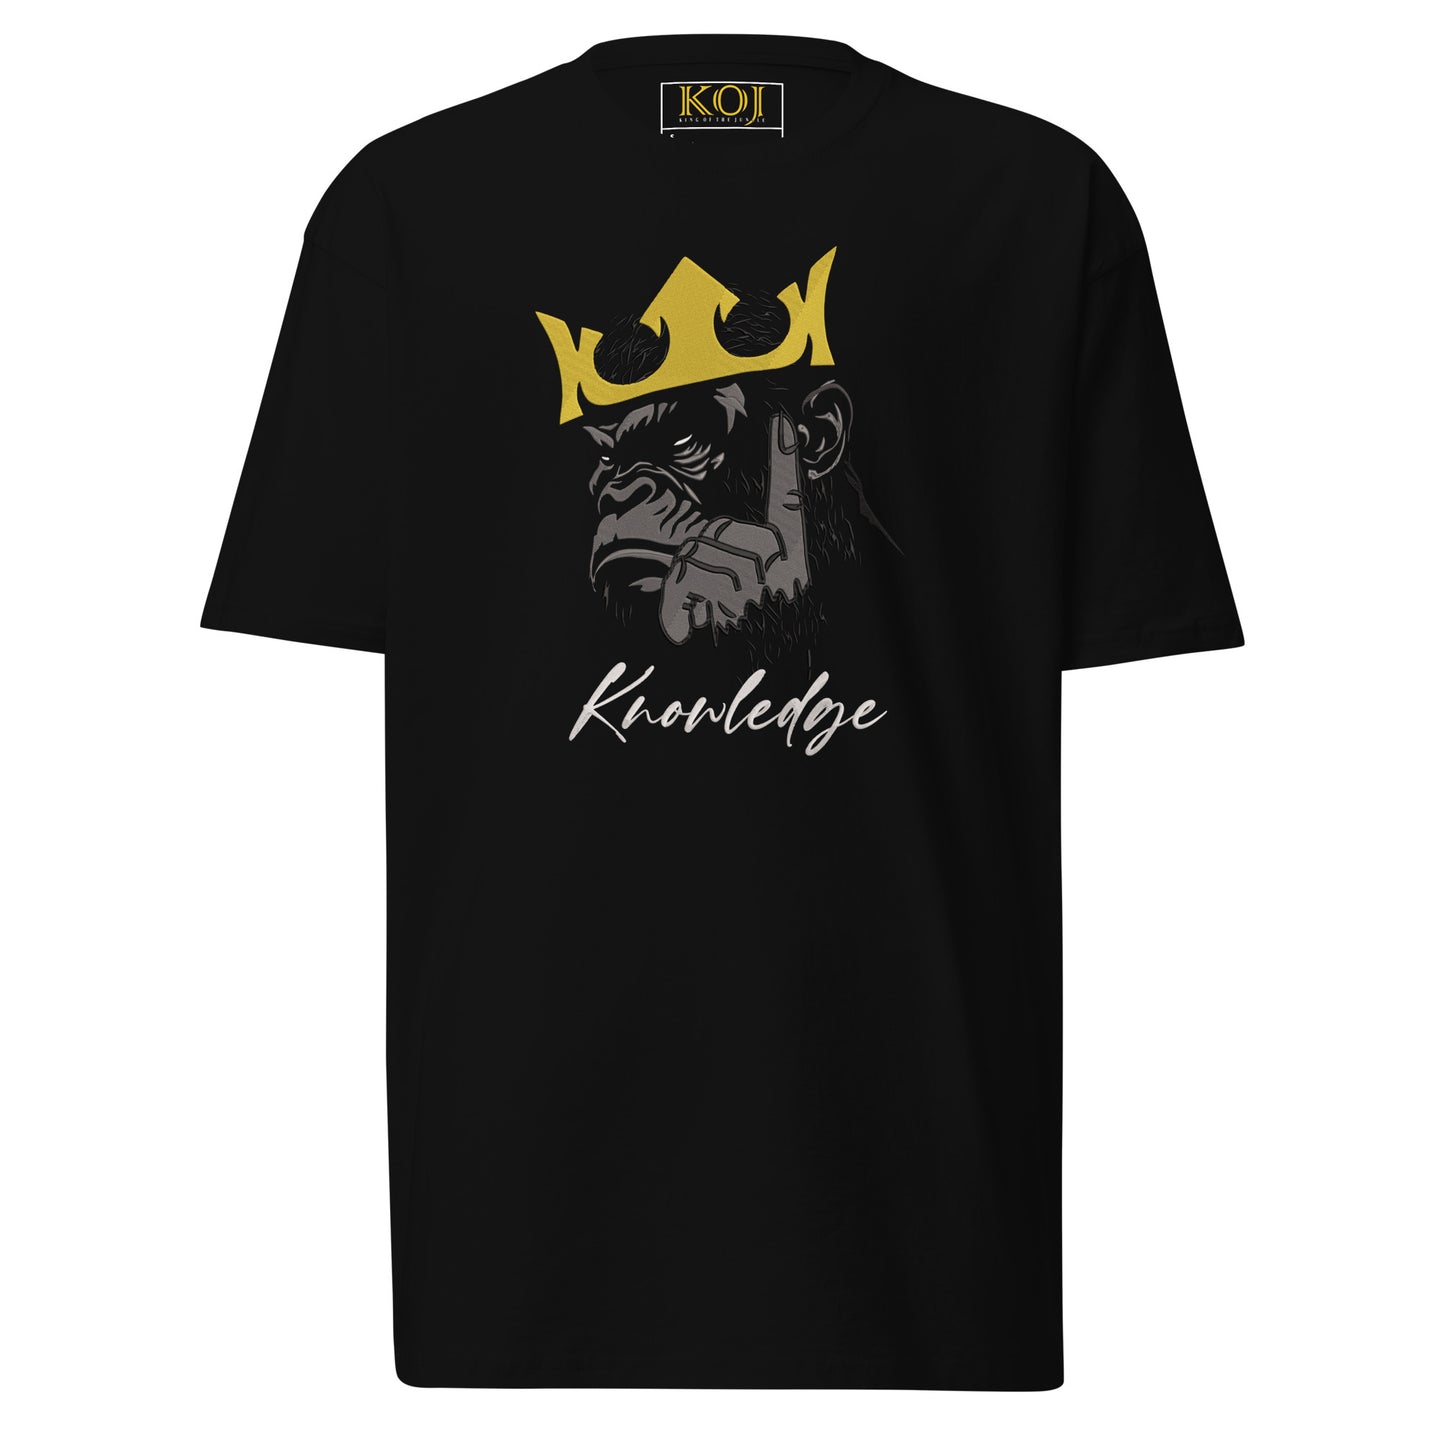 Knowledge is King - King of the Jungle Silverback Edition Premium T-Shirt